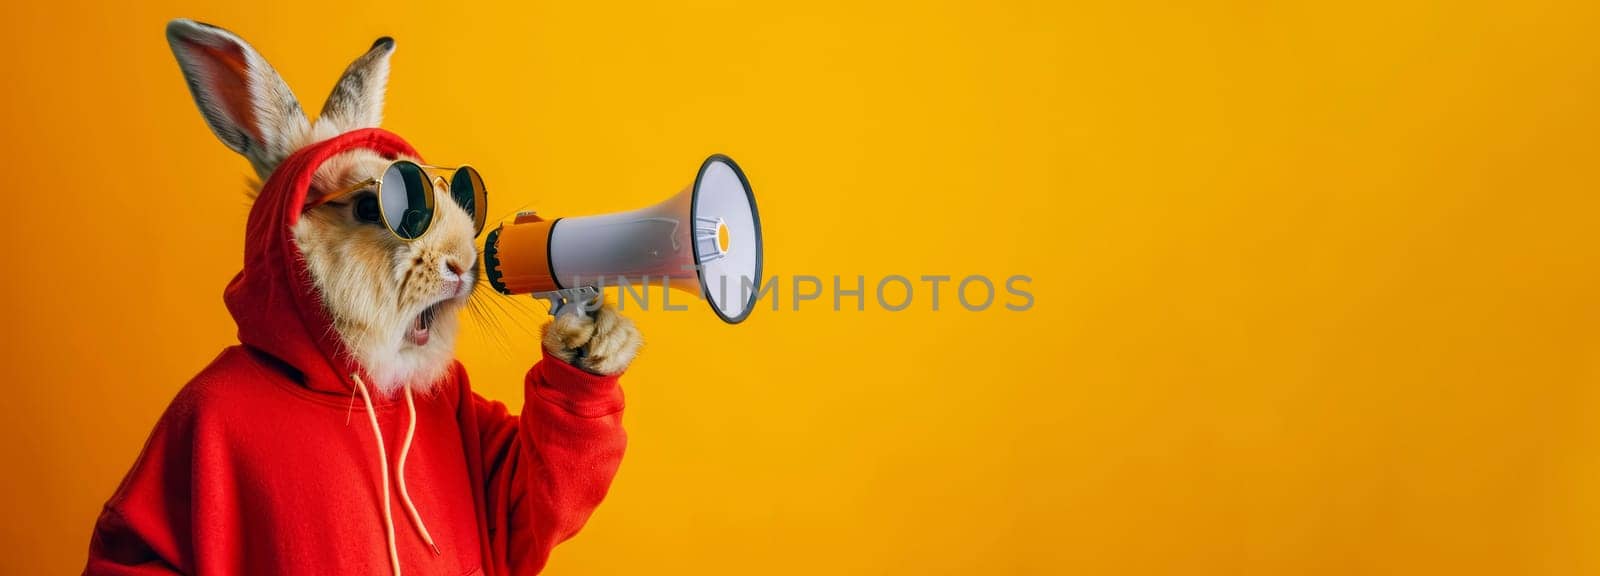 Costumed Rabbit with Megaphone on Yellow by andreyz